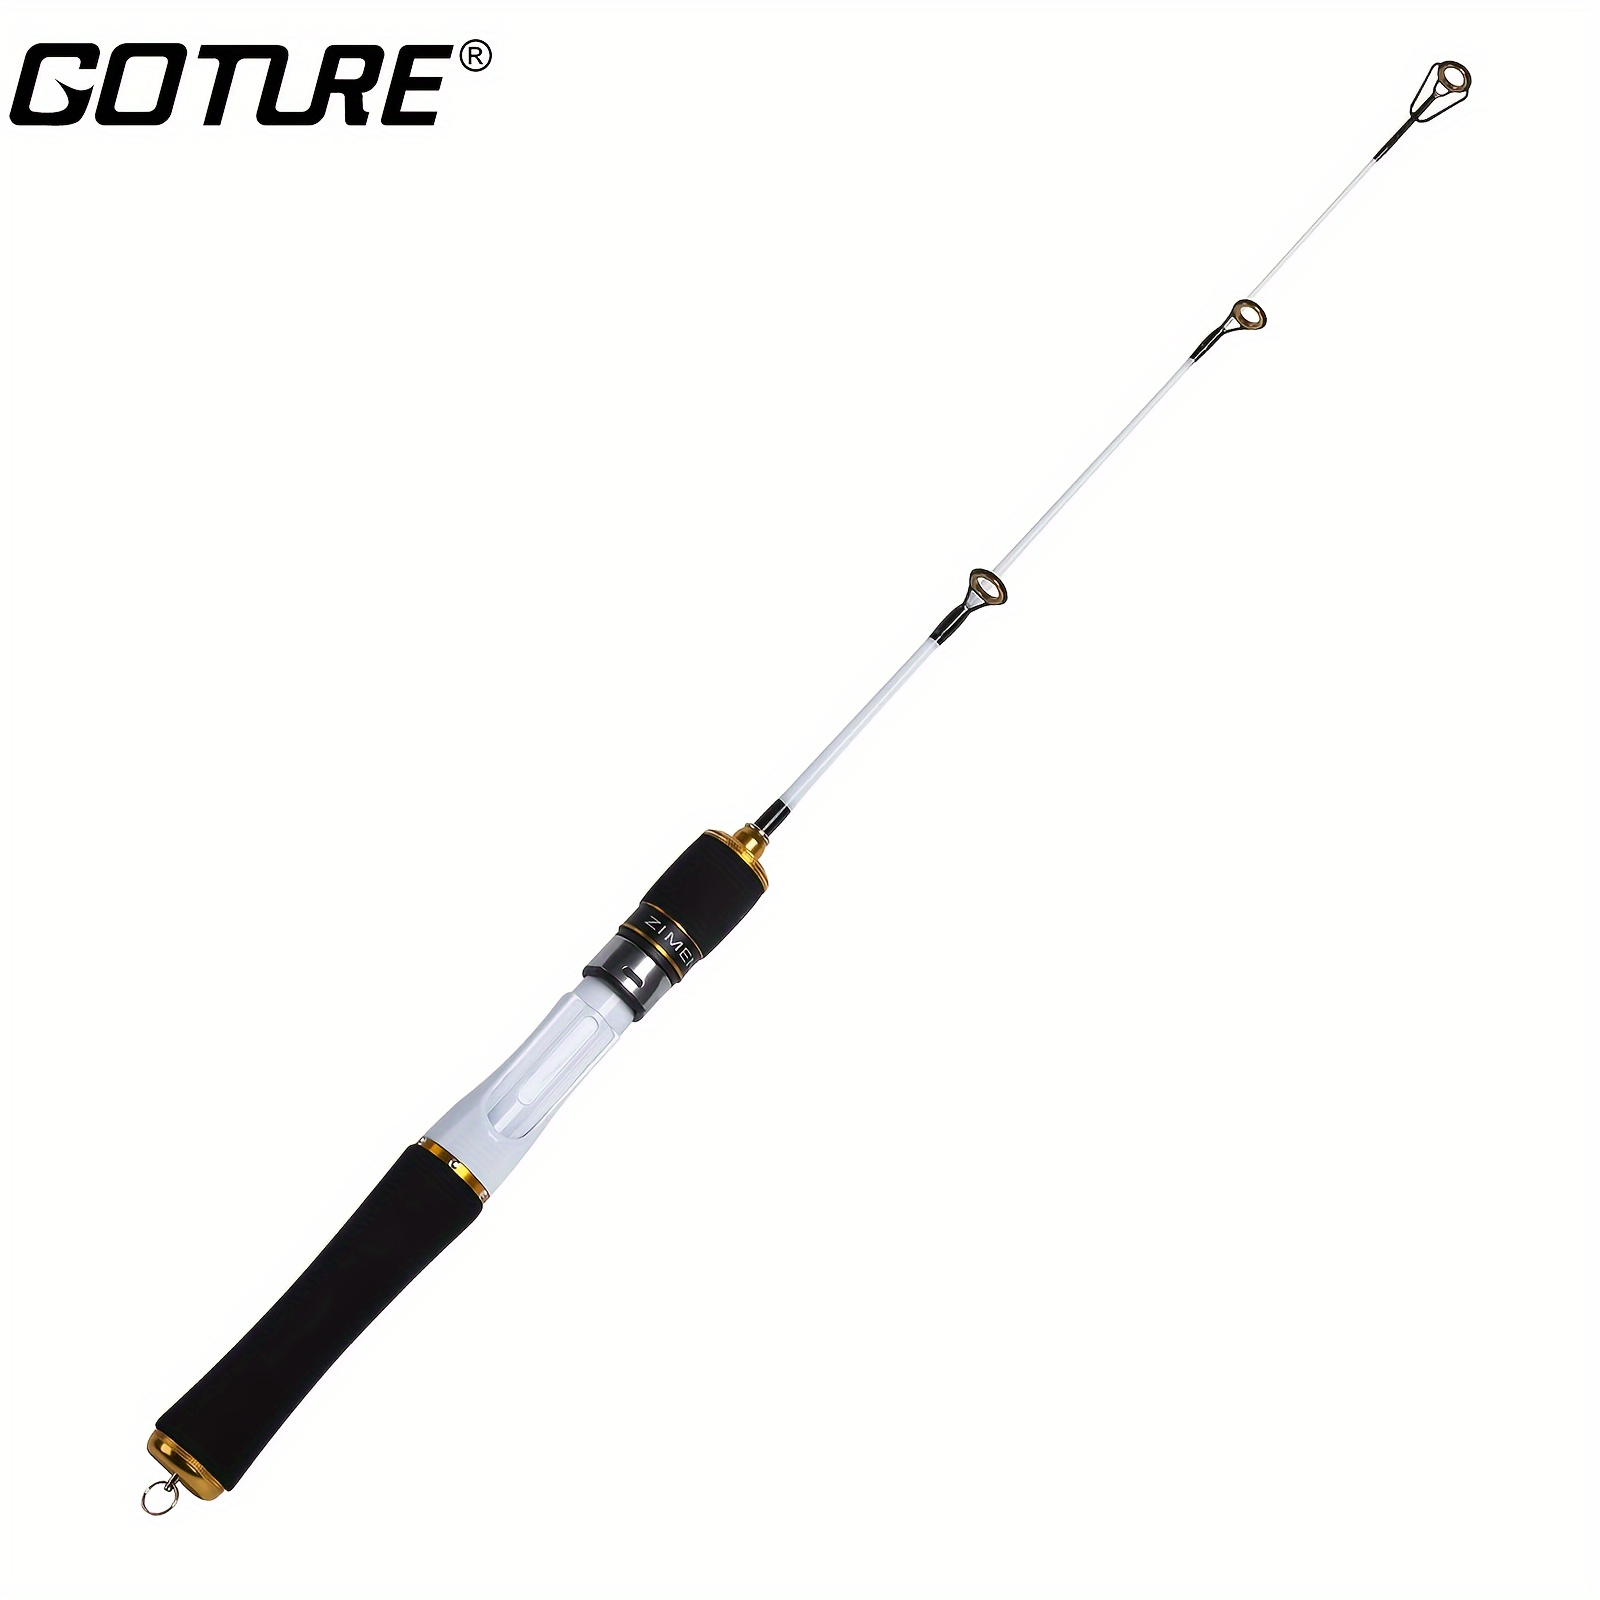 Goture 1pc White Ice Fishing Rod With Spiral Wheel Base, Short Portable  Fishing Pole, 23.62in/60cm